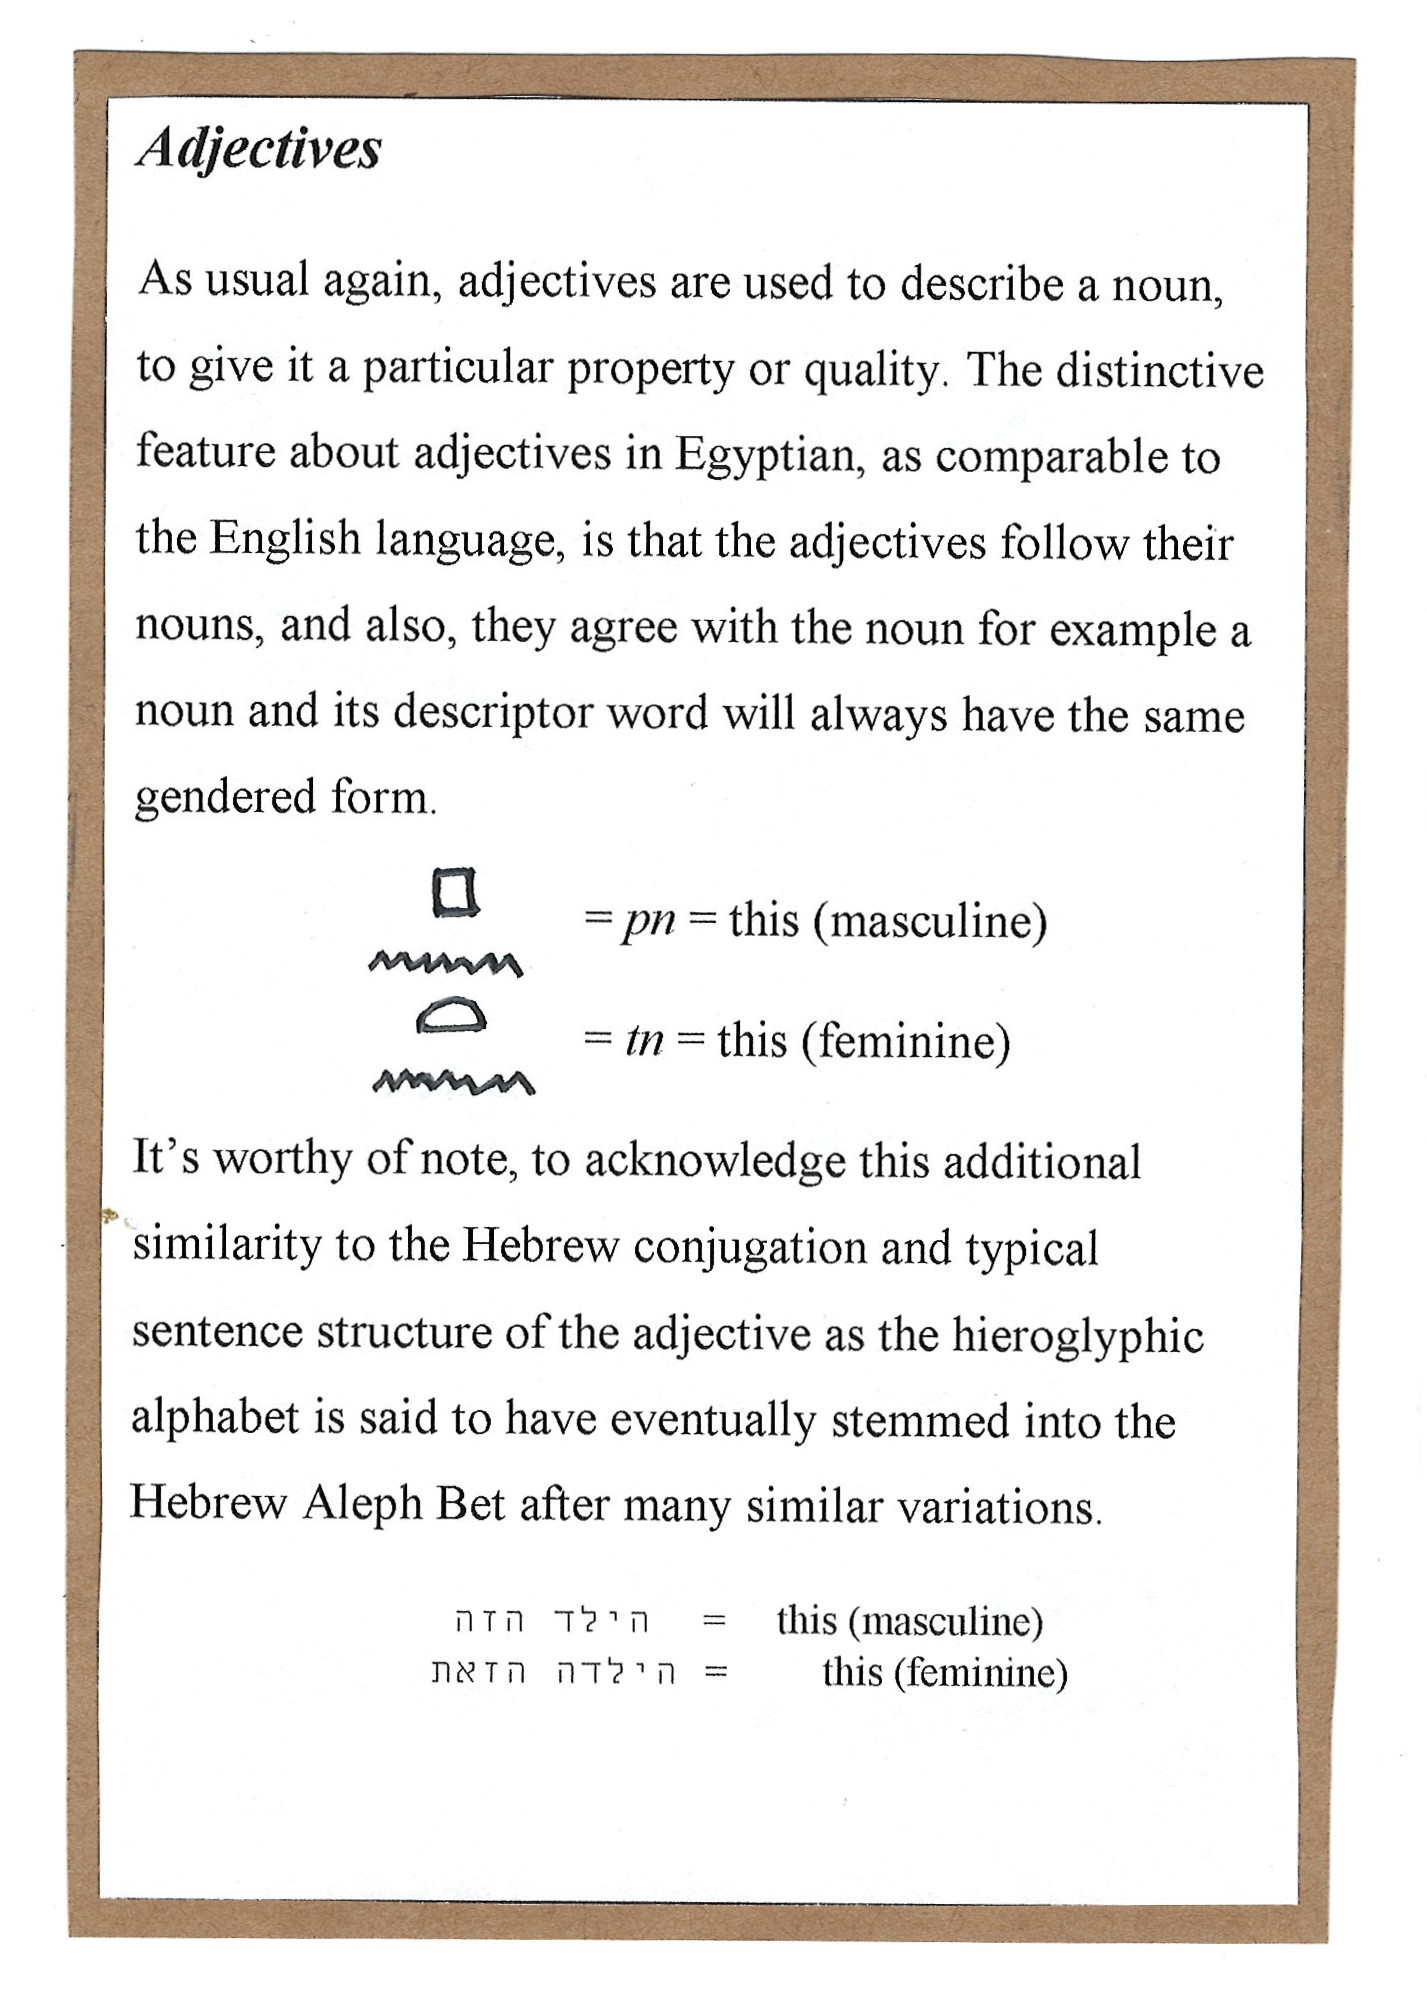 Page 11. Adjectives in Egyptian Hieroglyphs and how that may differ from our own understanding in the English language.